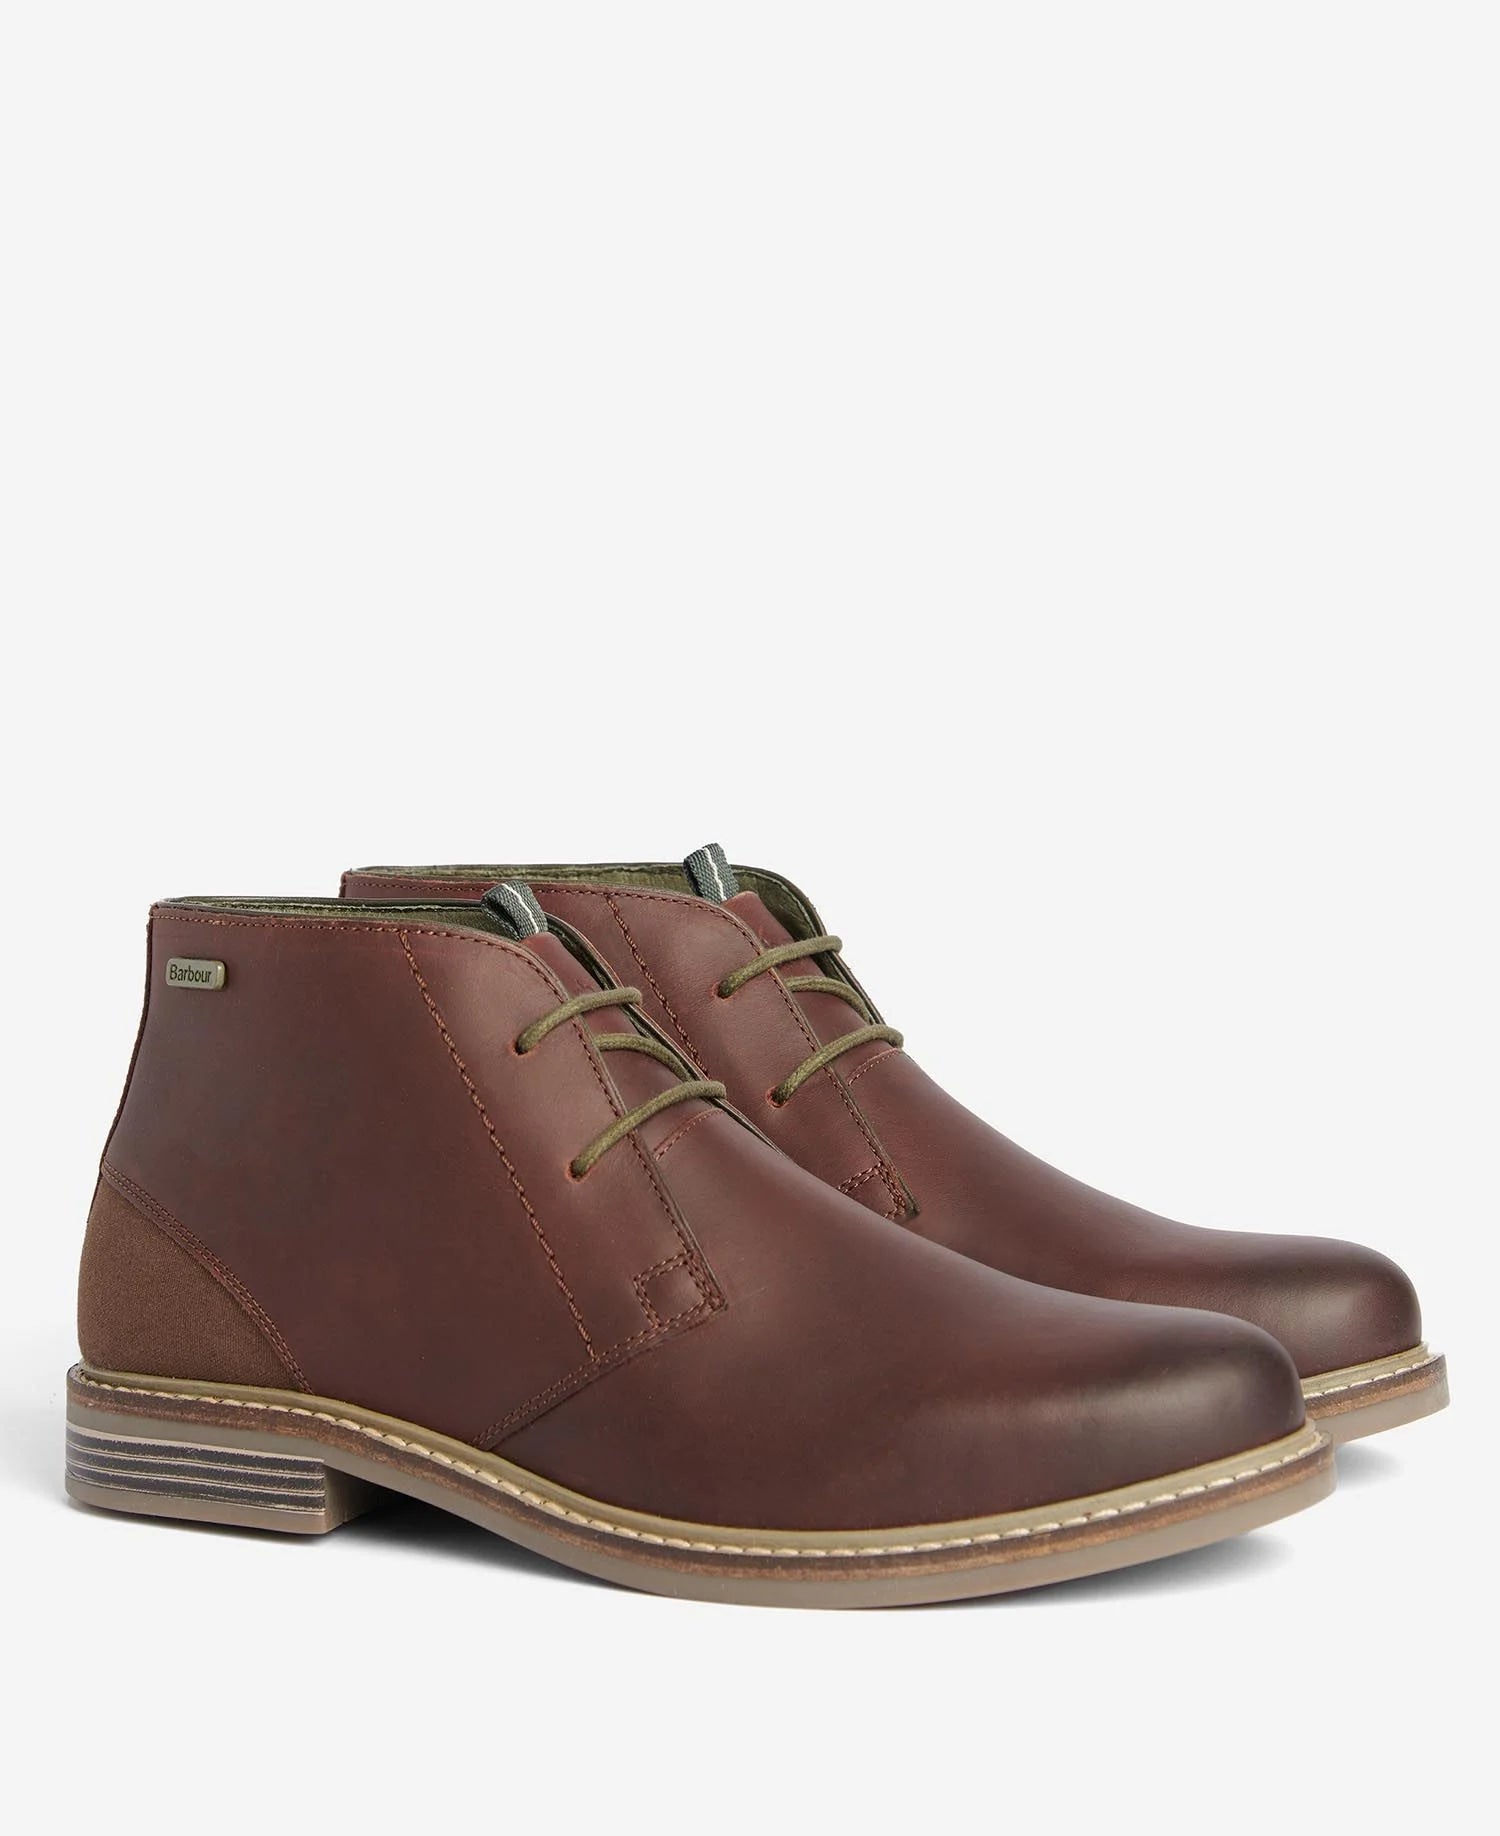 Barbour Men's Readhead Boots in Oxblood